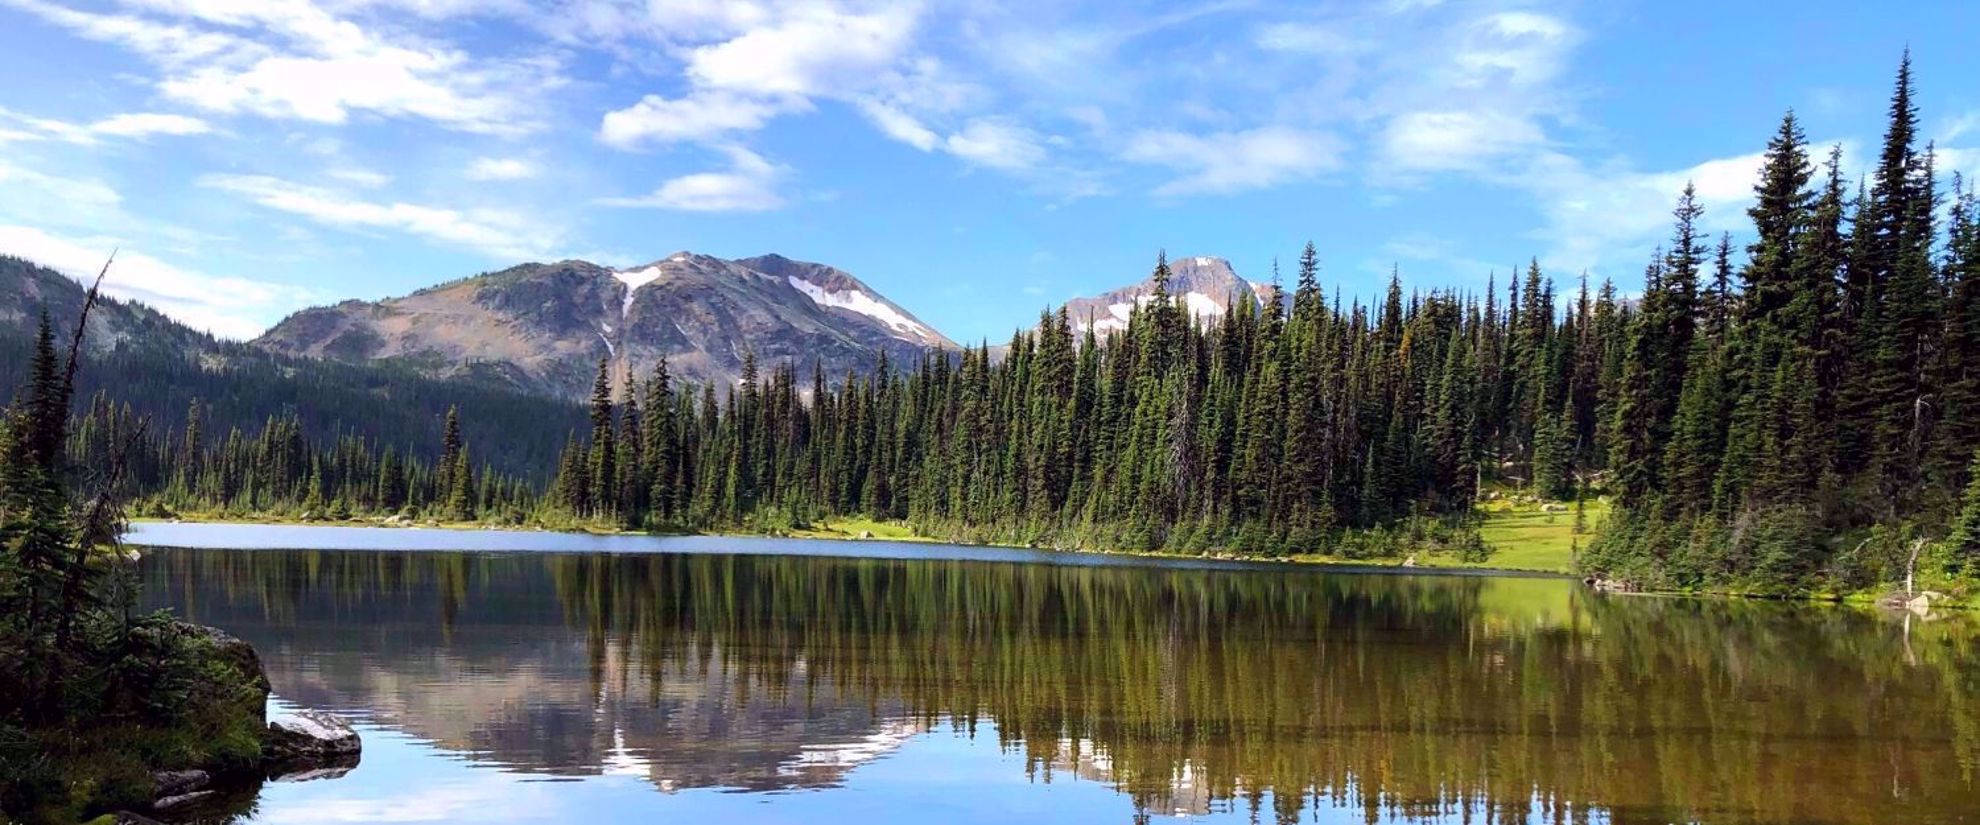 high mountain lakes in the wells gray wilderness